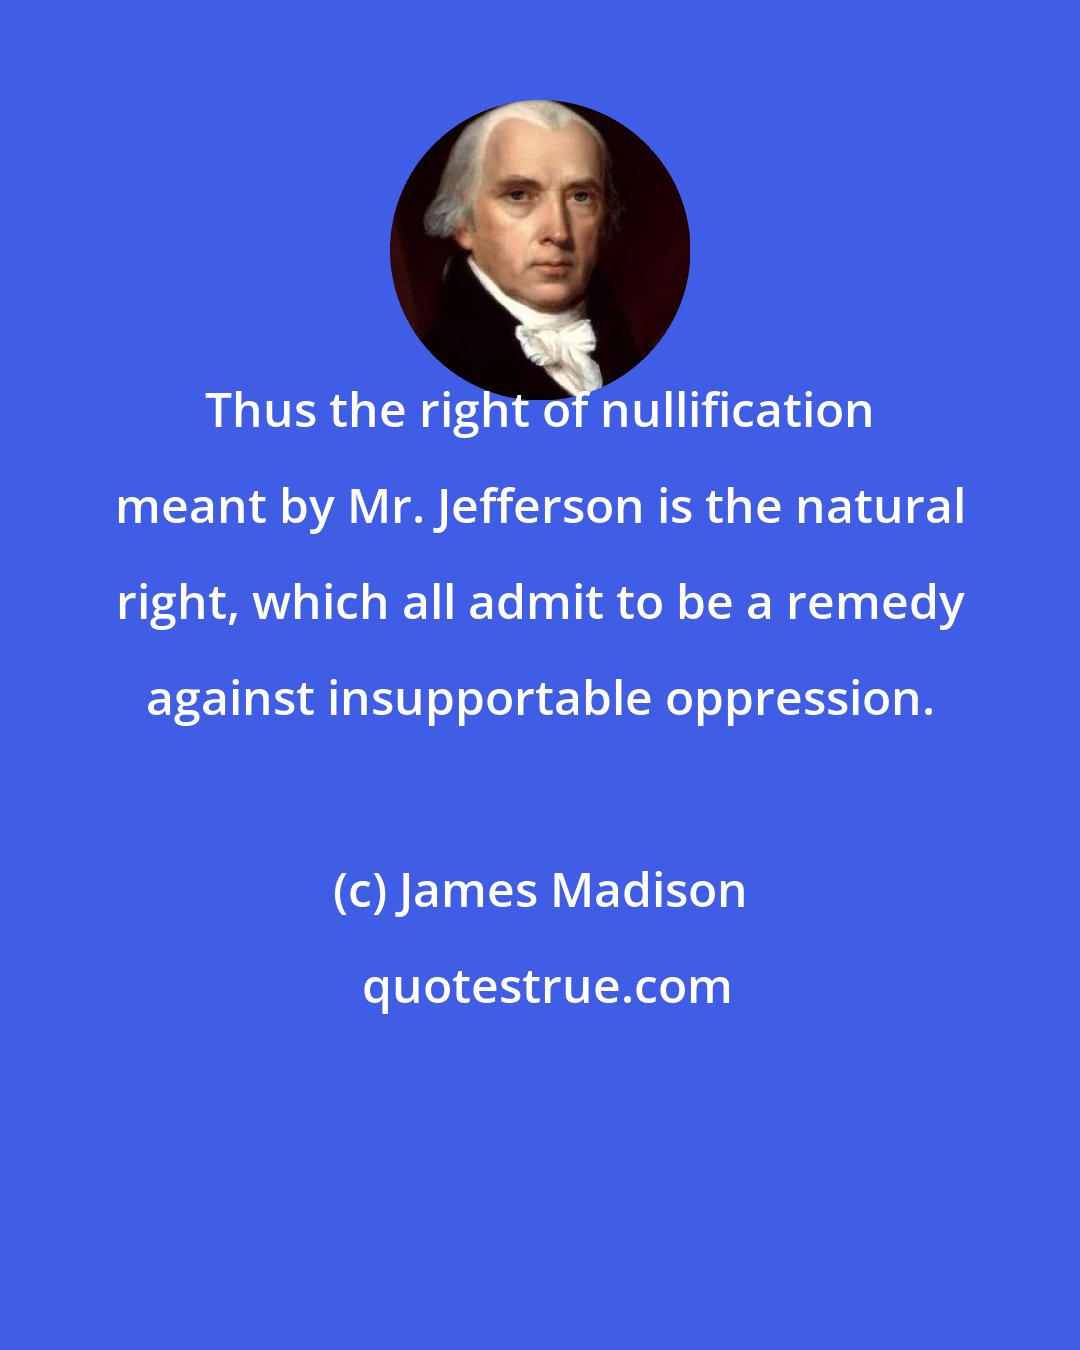 James Madison: Thus the right of nullification meant by Mr. Jefferson is the natural right, which all admit to be a remedy against insupportable oppression.